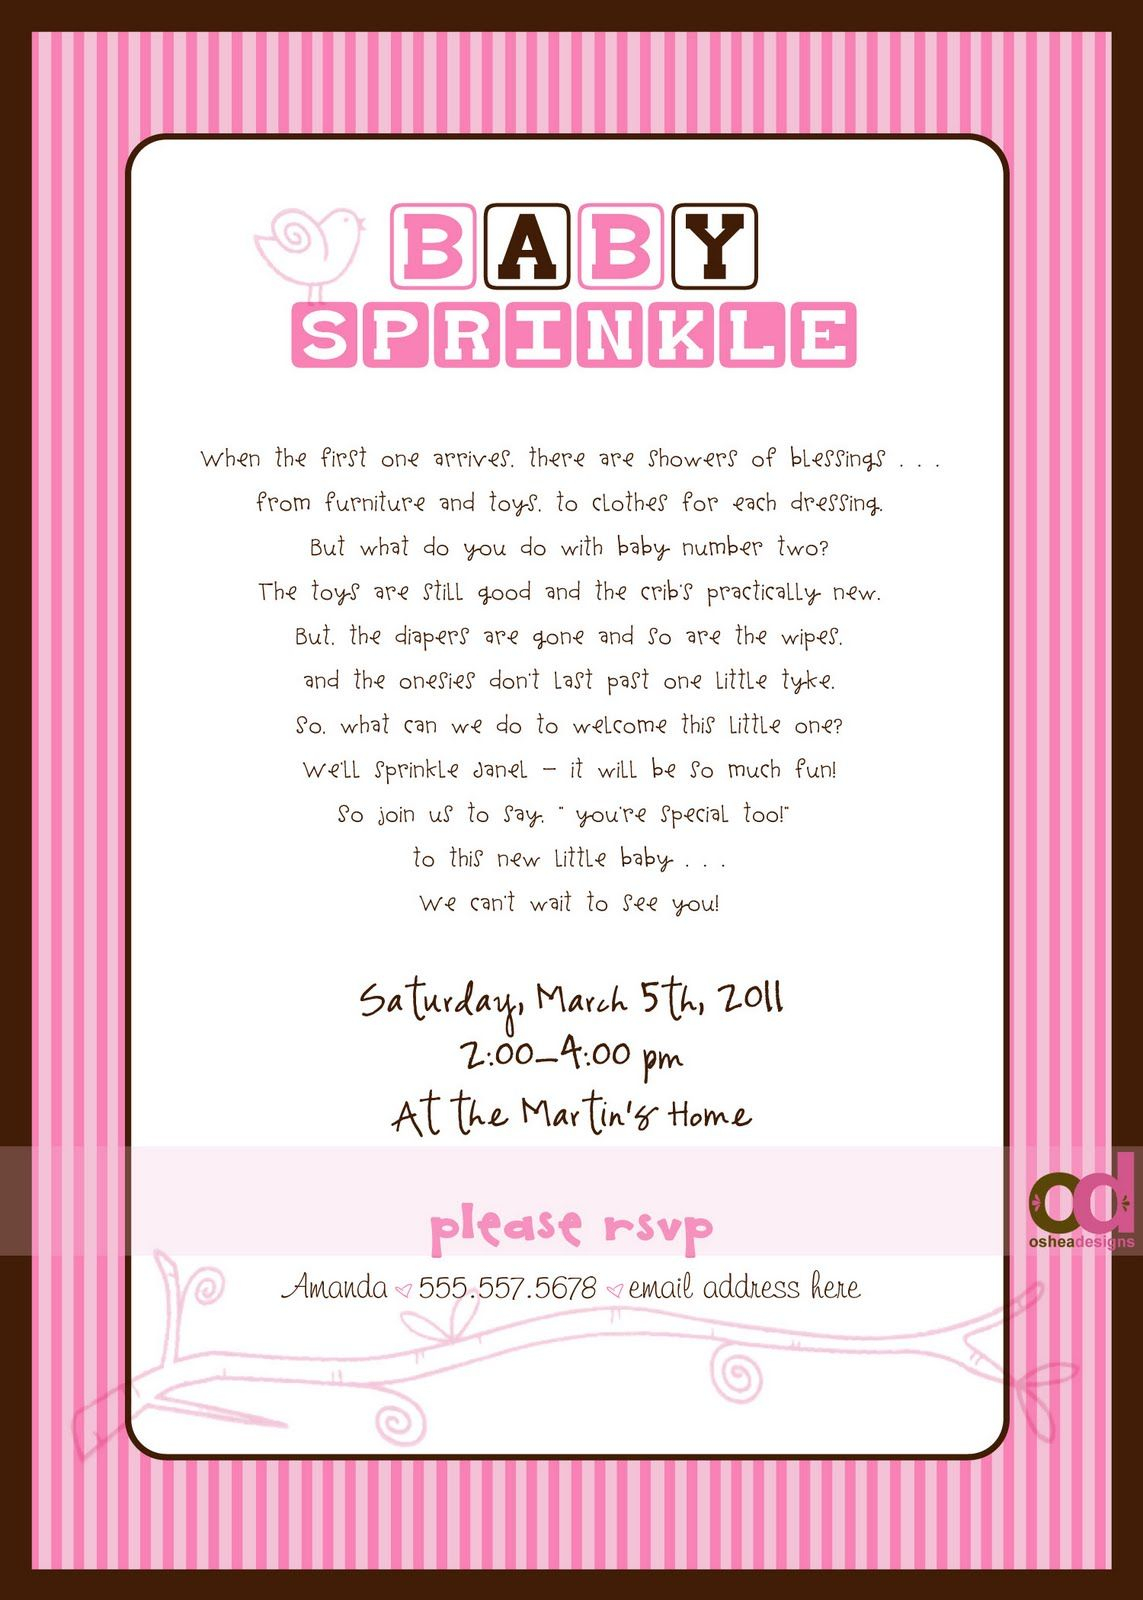 Sprinkle Invitations Wording Wish I Would Have Found This A Few in dimensions 1143 X 1600